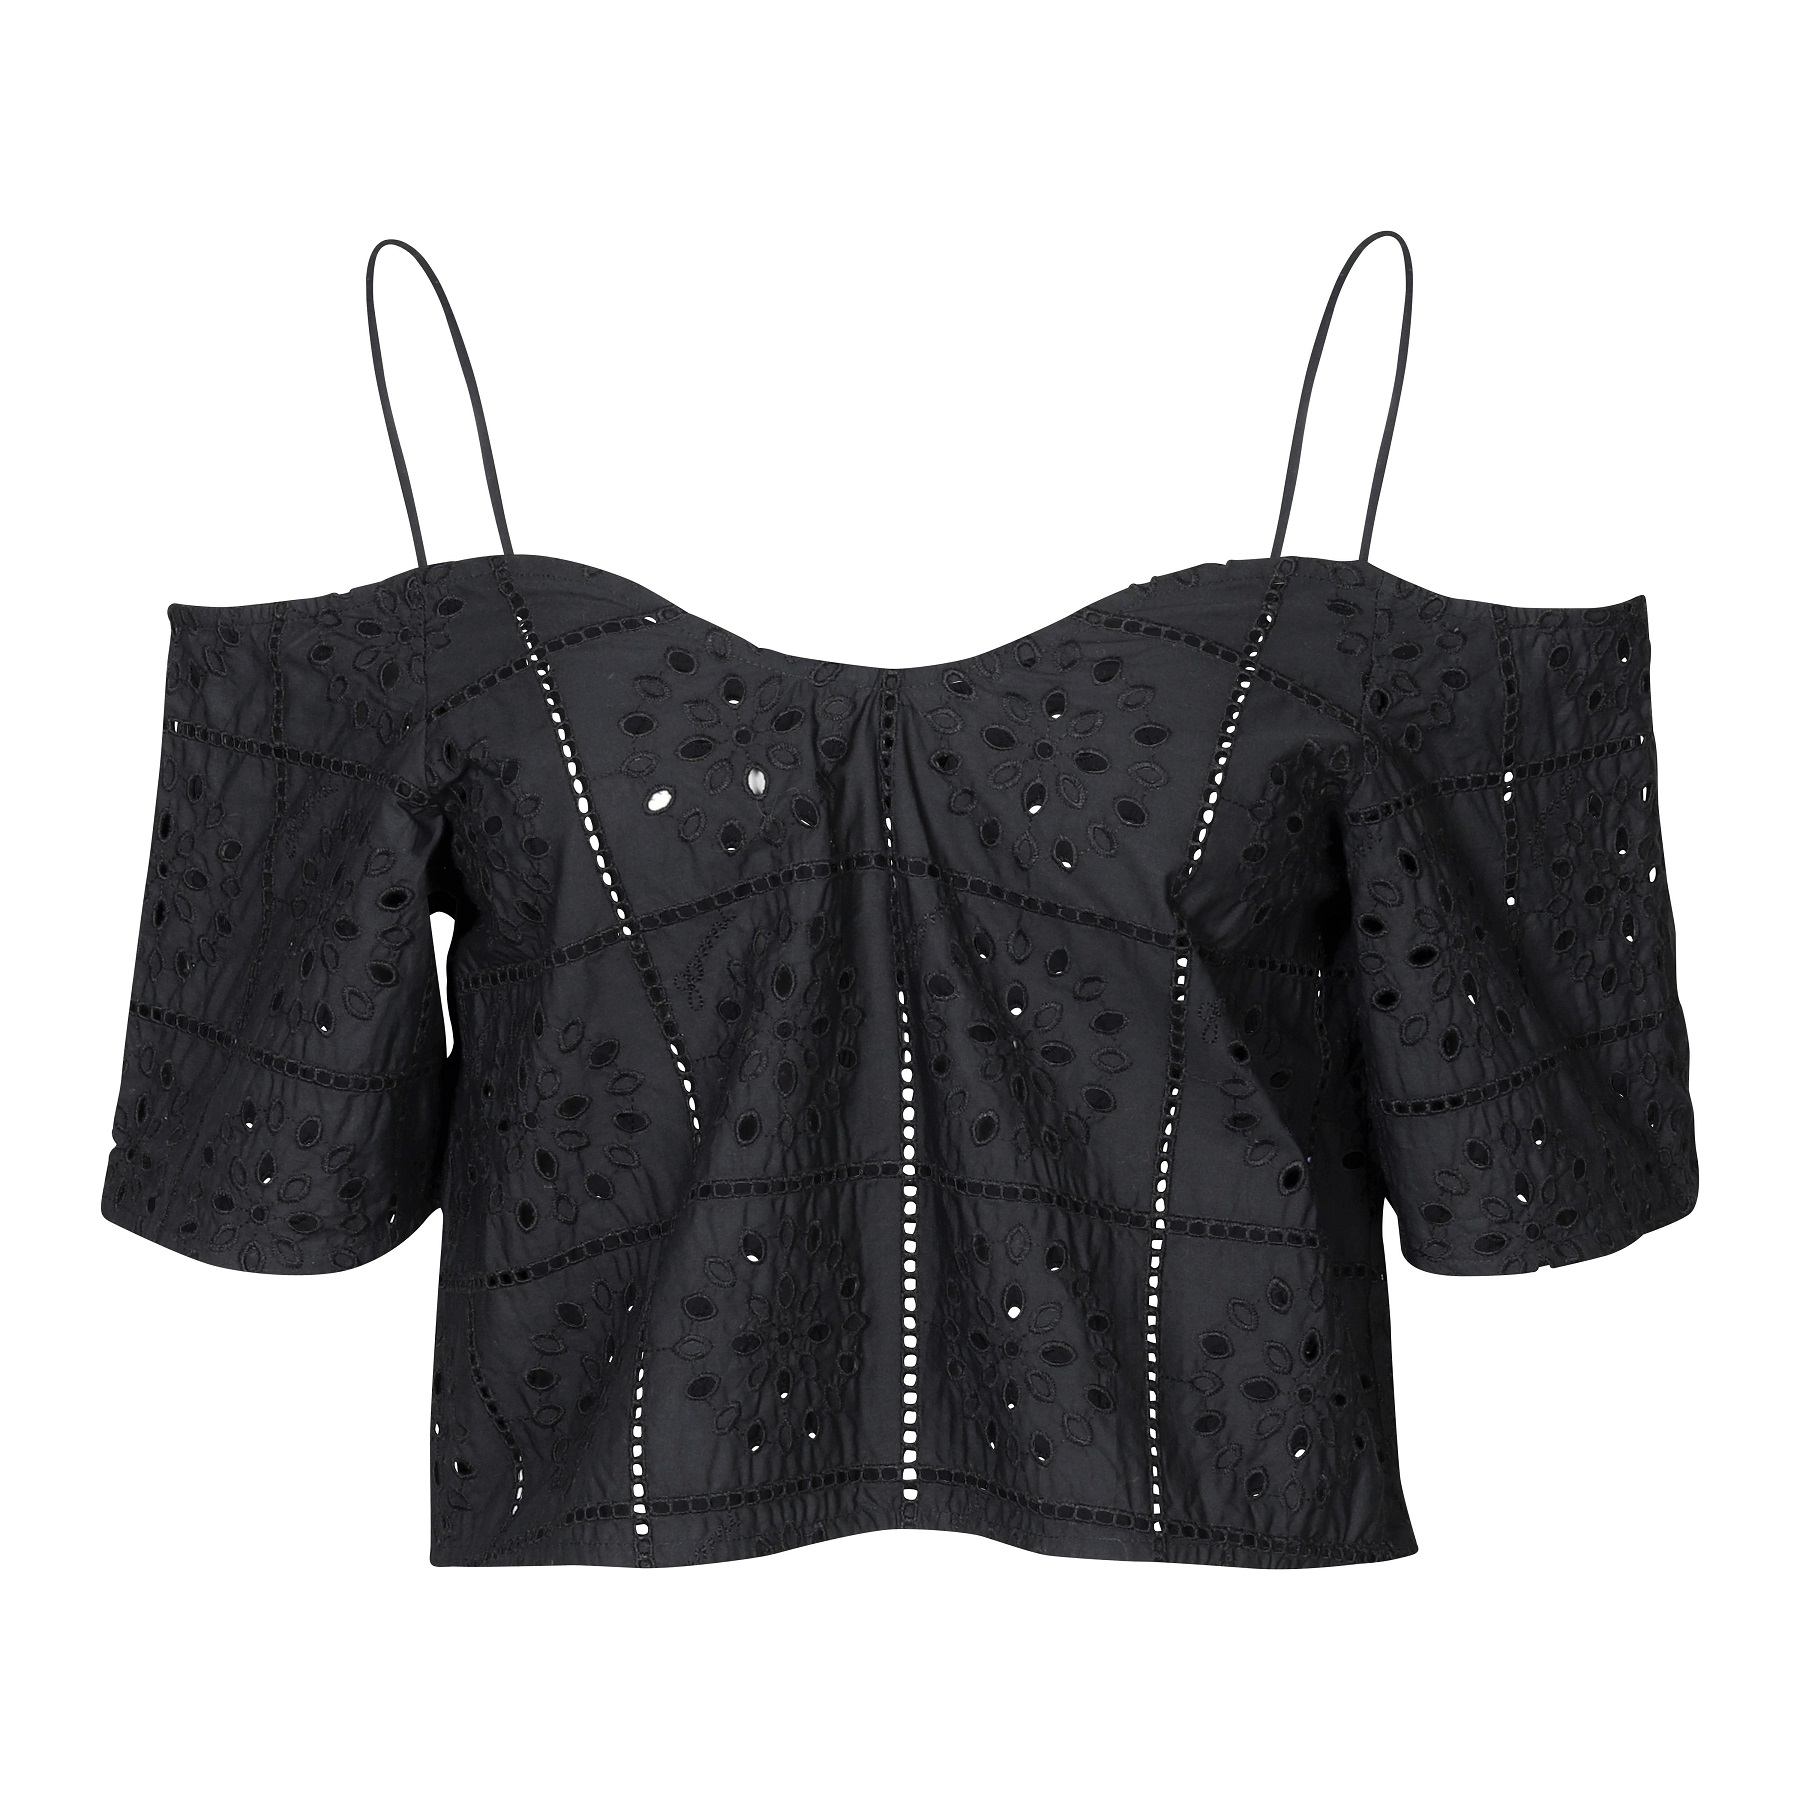 GANNI Broderie Anglaise Top in Black